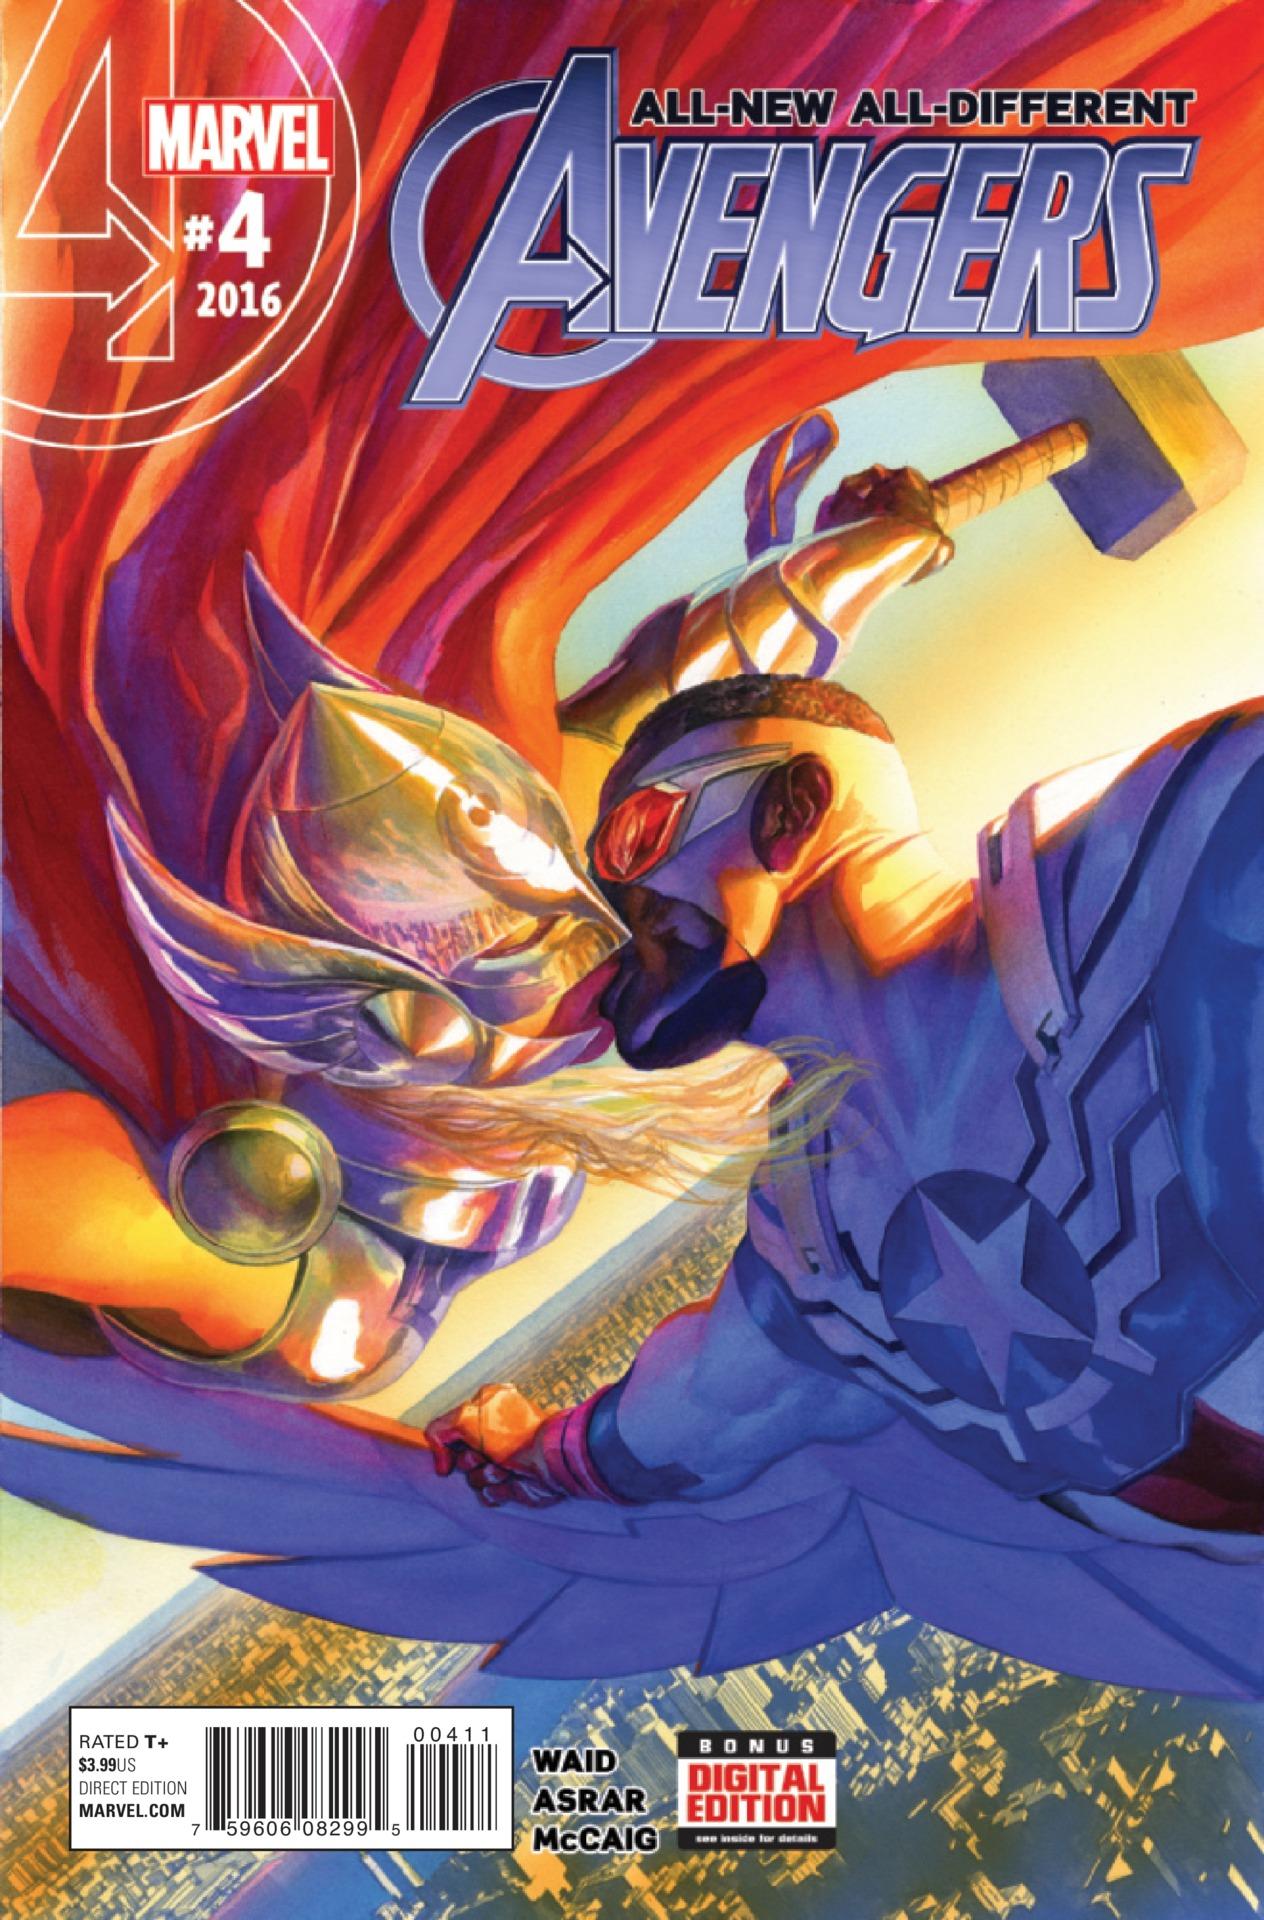 All-New, All-Different Avengers Vol. 1 #4